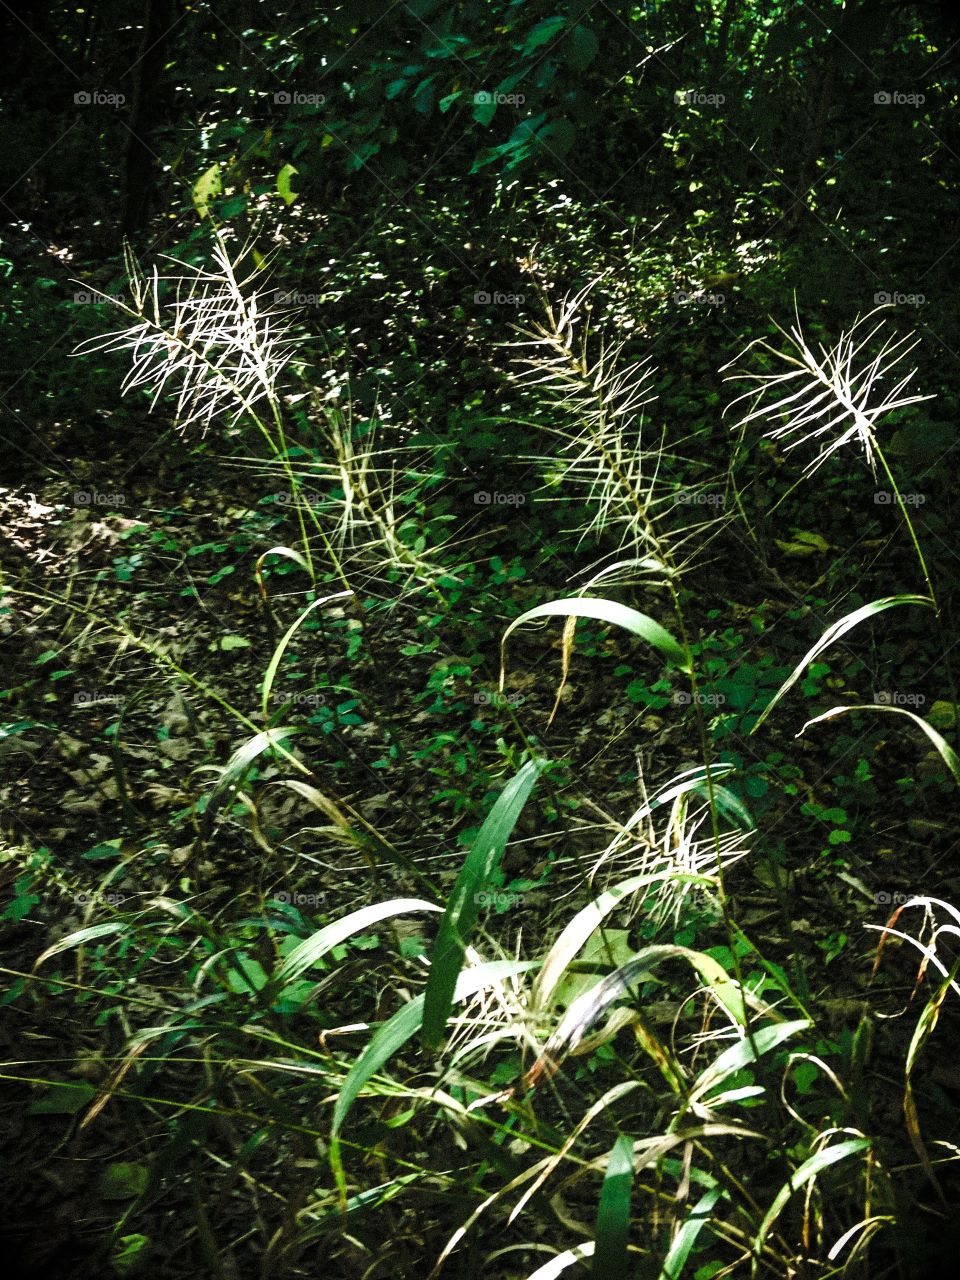 Sunlit weeds in woods in late August